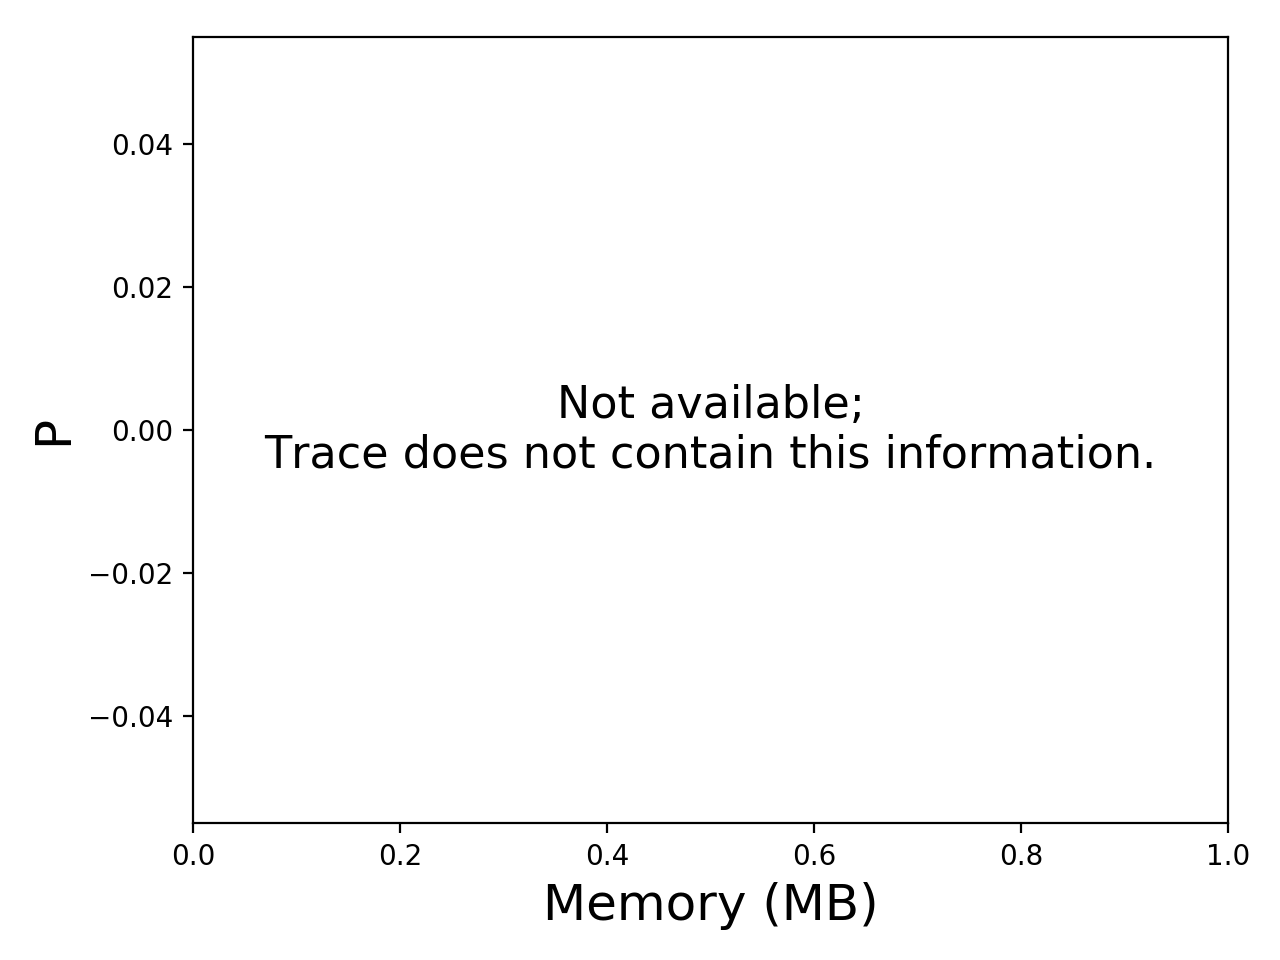 Task memory consumption graph for the Pegasus_P4 trace.